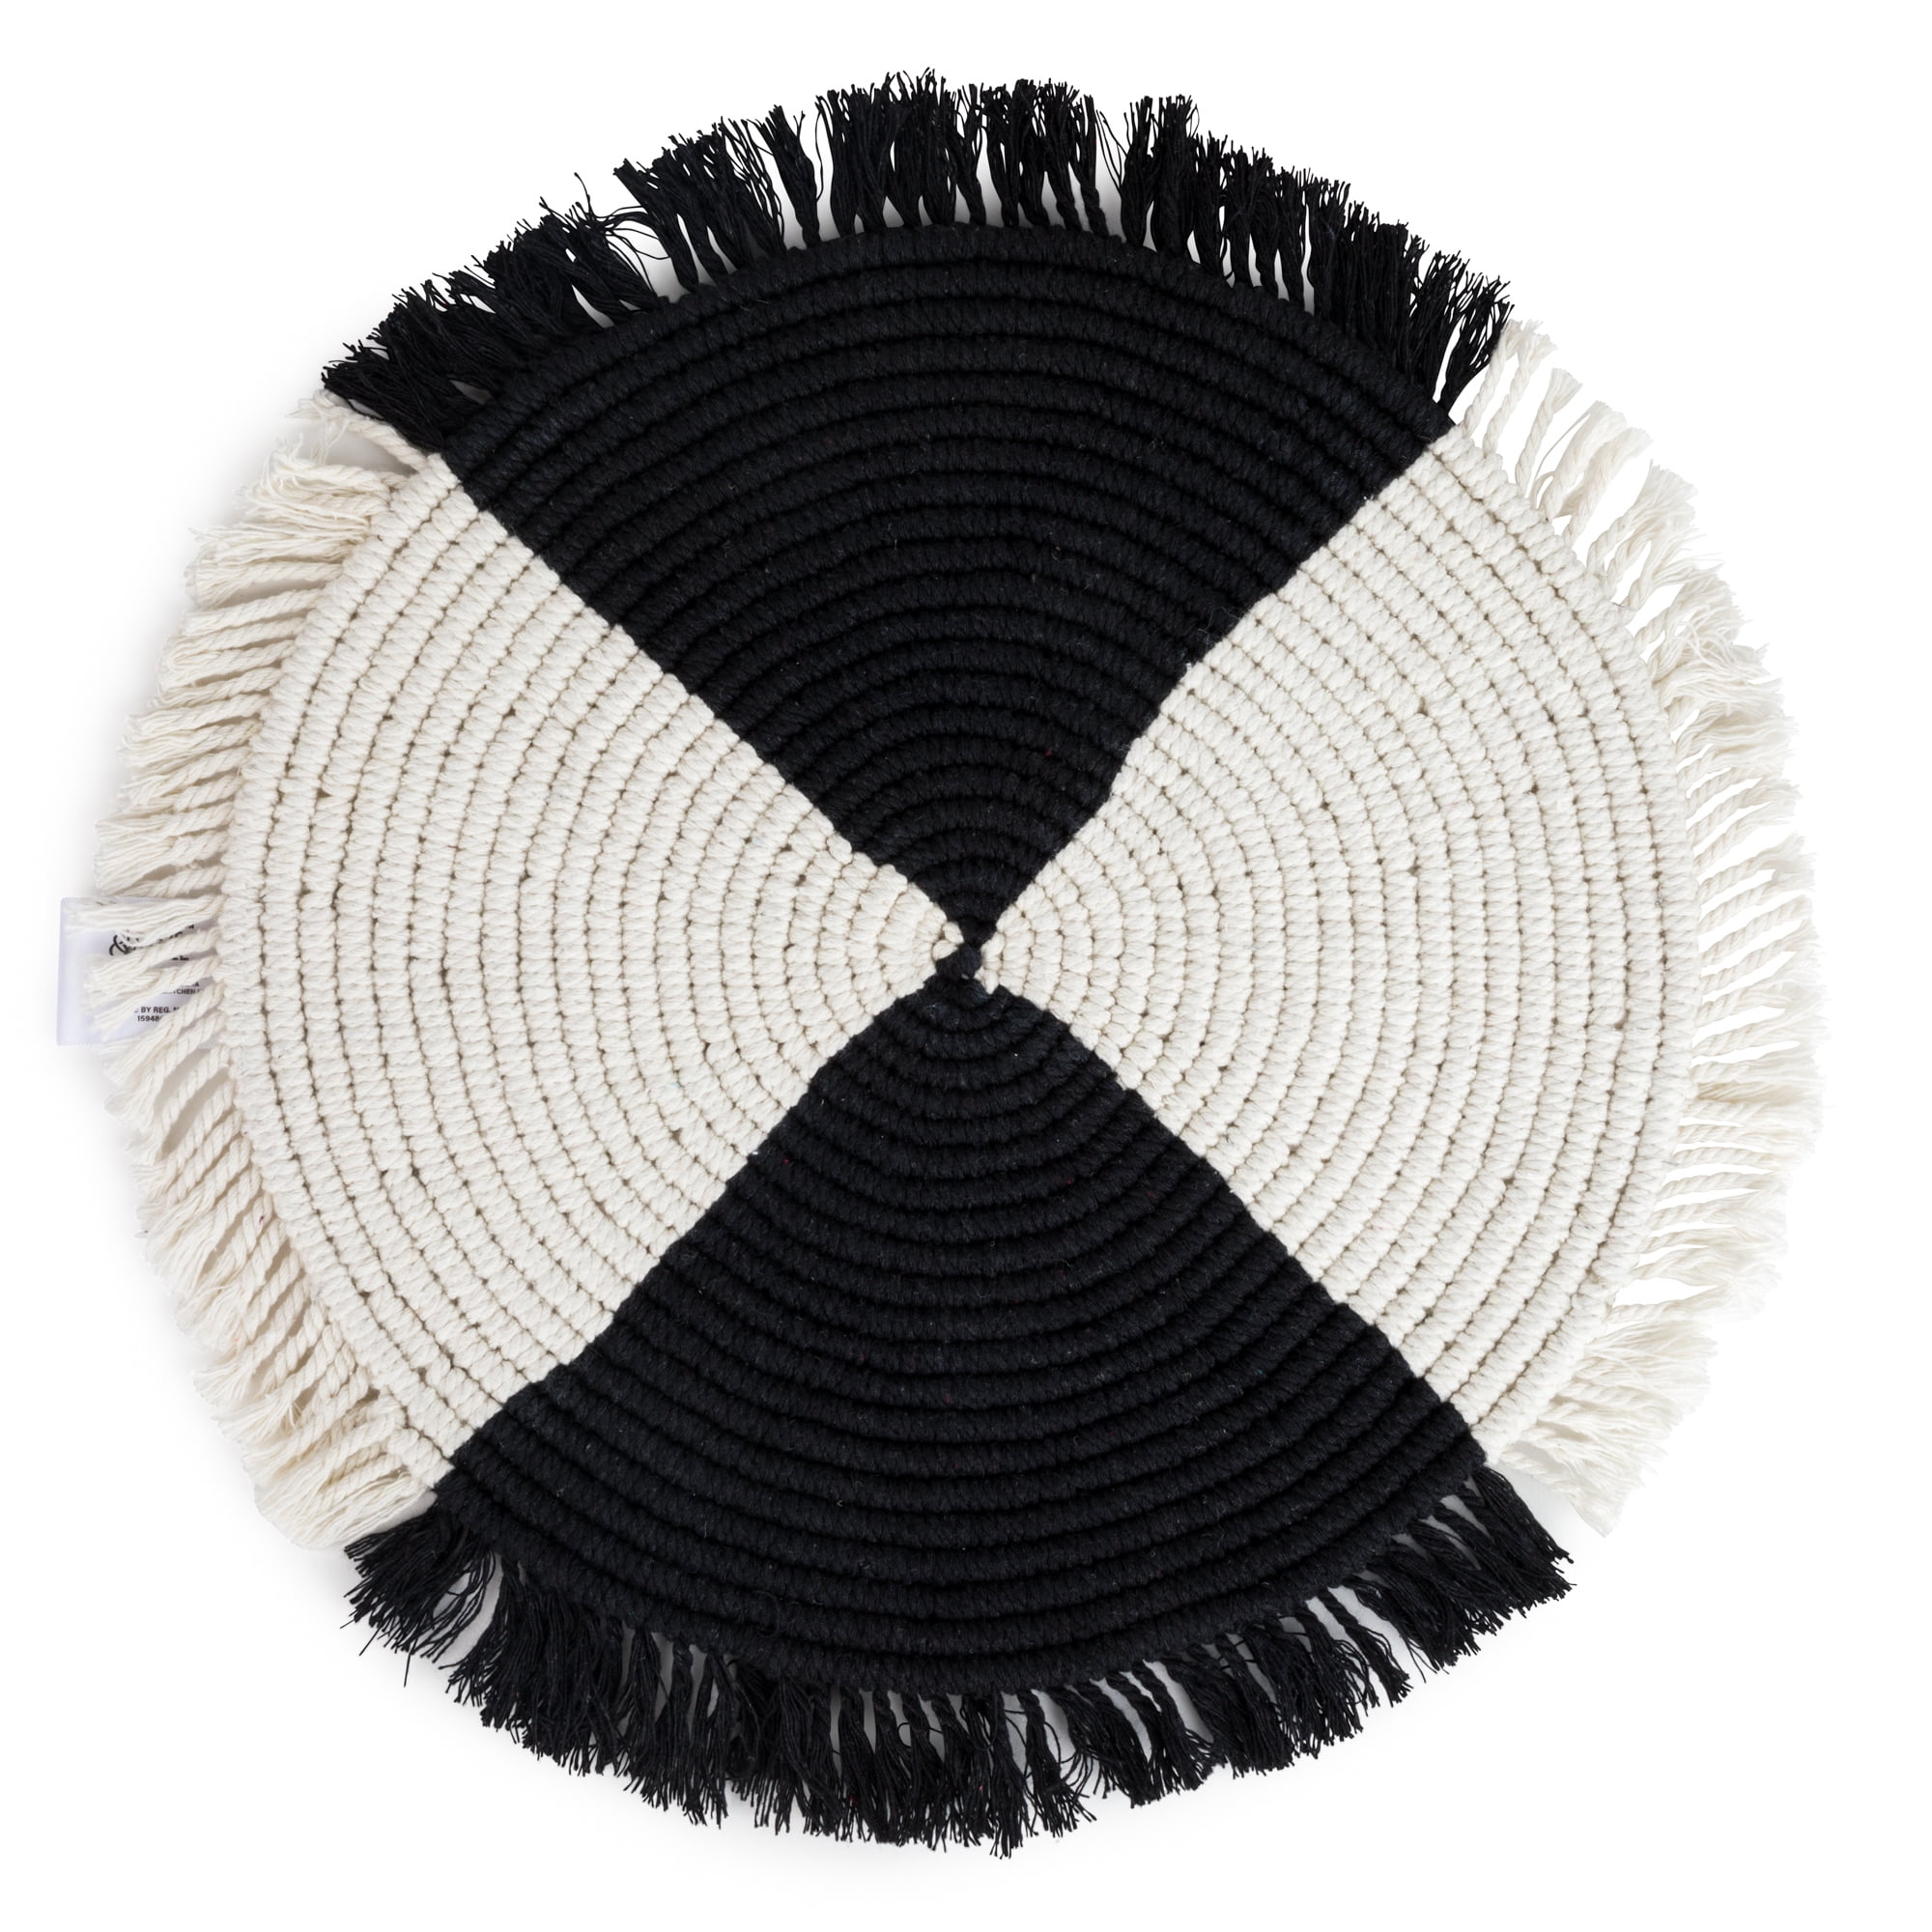 Thyme & Table Handwoven Placemat, Black White, 18"